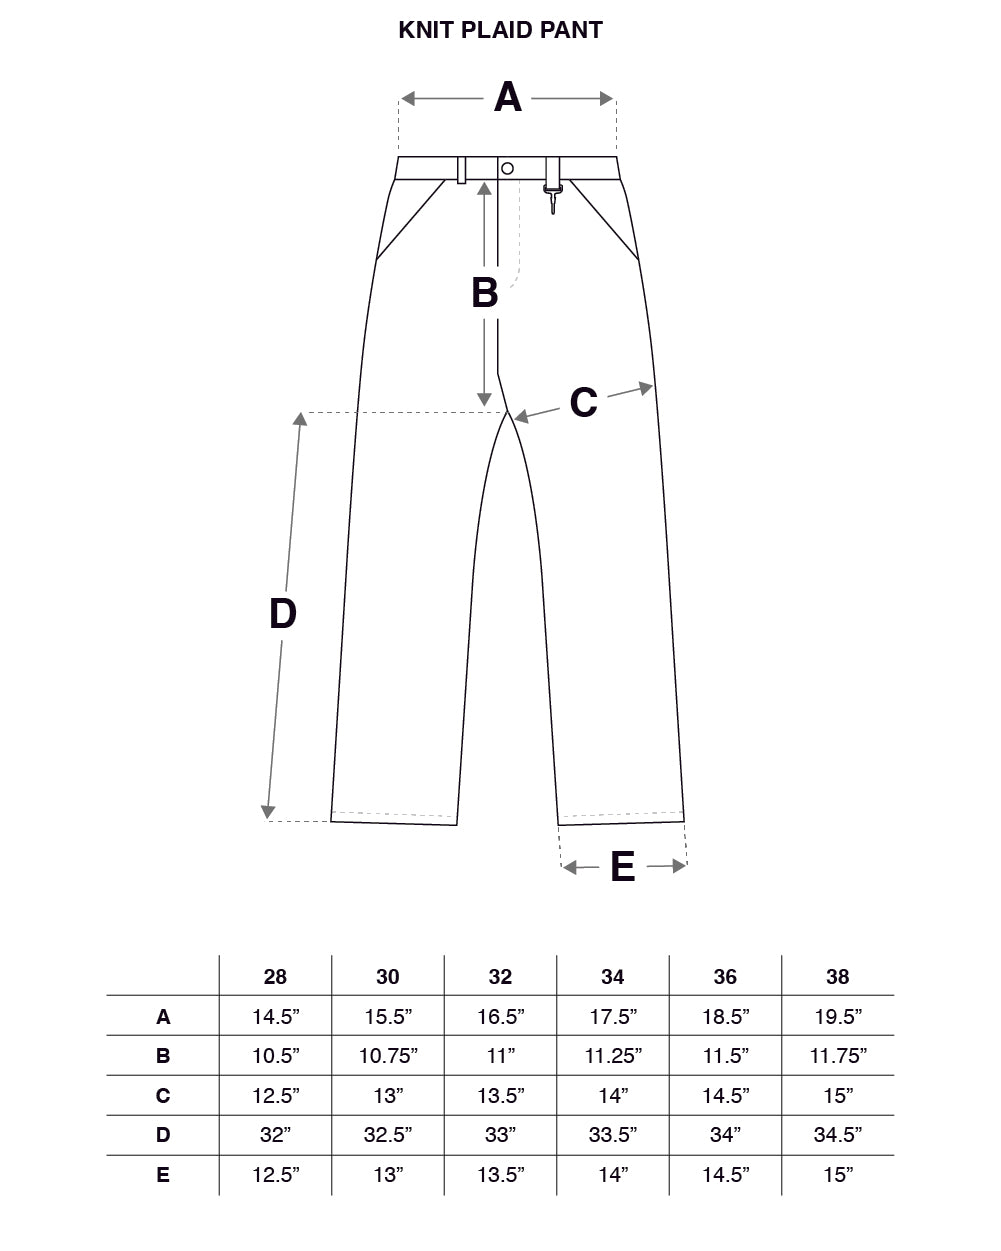 Knit Plaid Wool Front Pocket Pant Size Guide